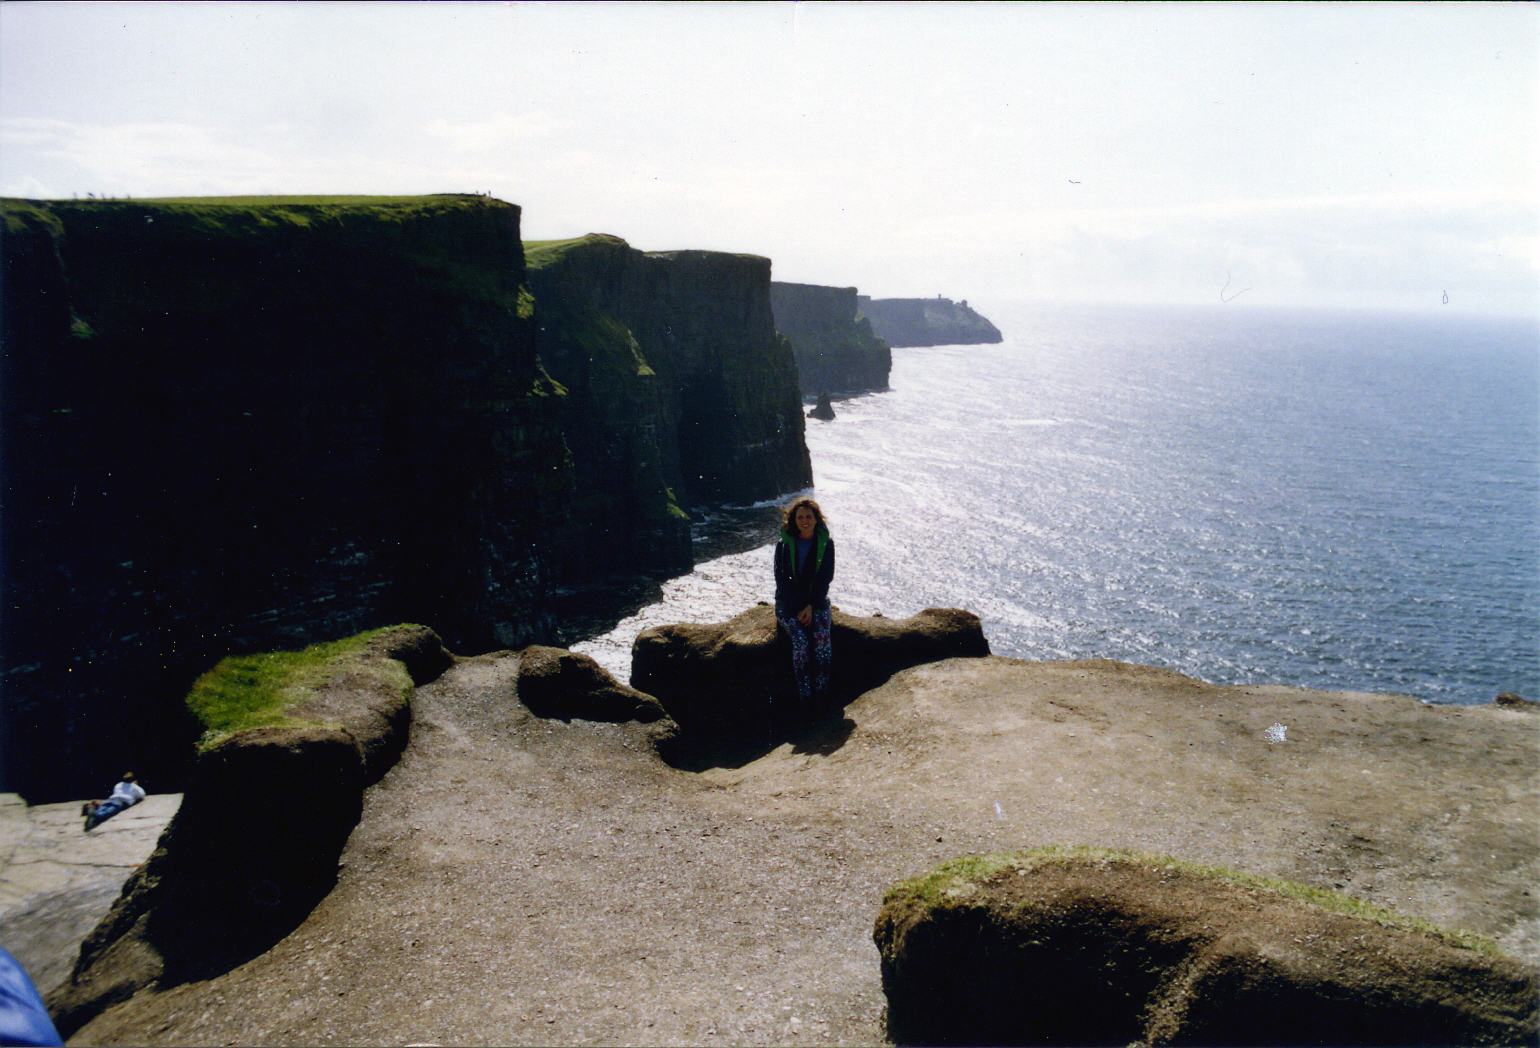 Martha at the Cliffs - photo from August 1992